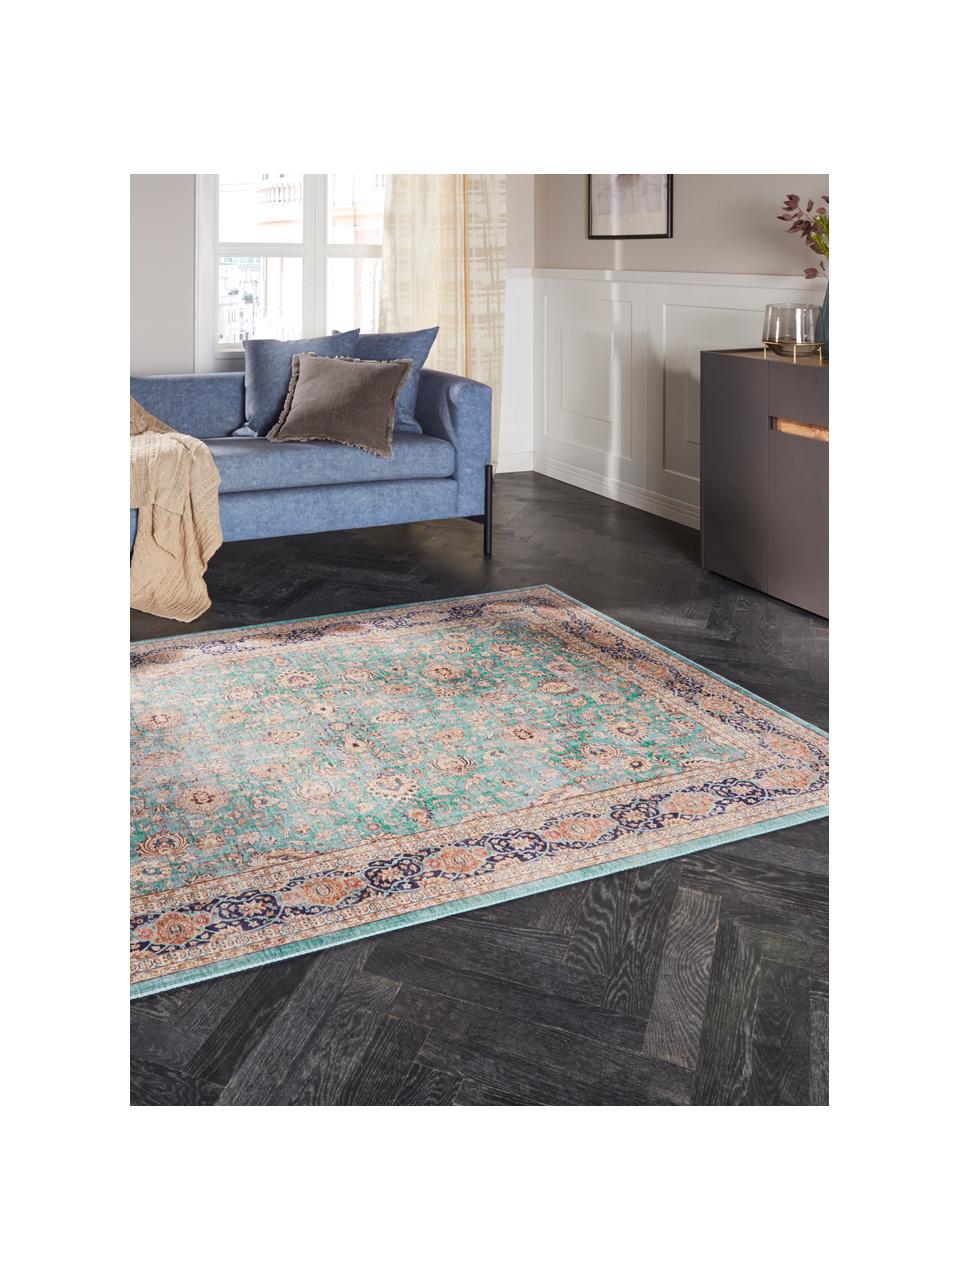 Tapis Keshan Mashad, 100 % polyester, Turquoise, multicolore, larg. 80 x long. 150 cm (taille XS)